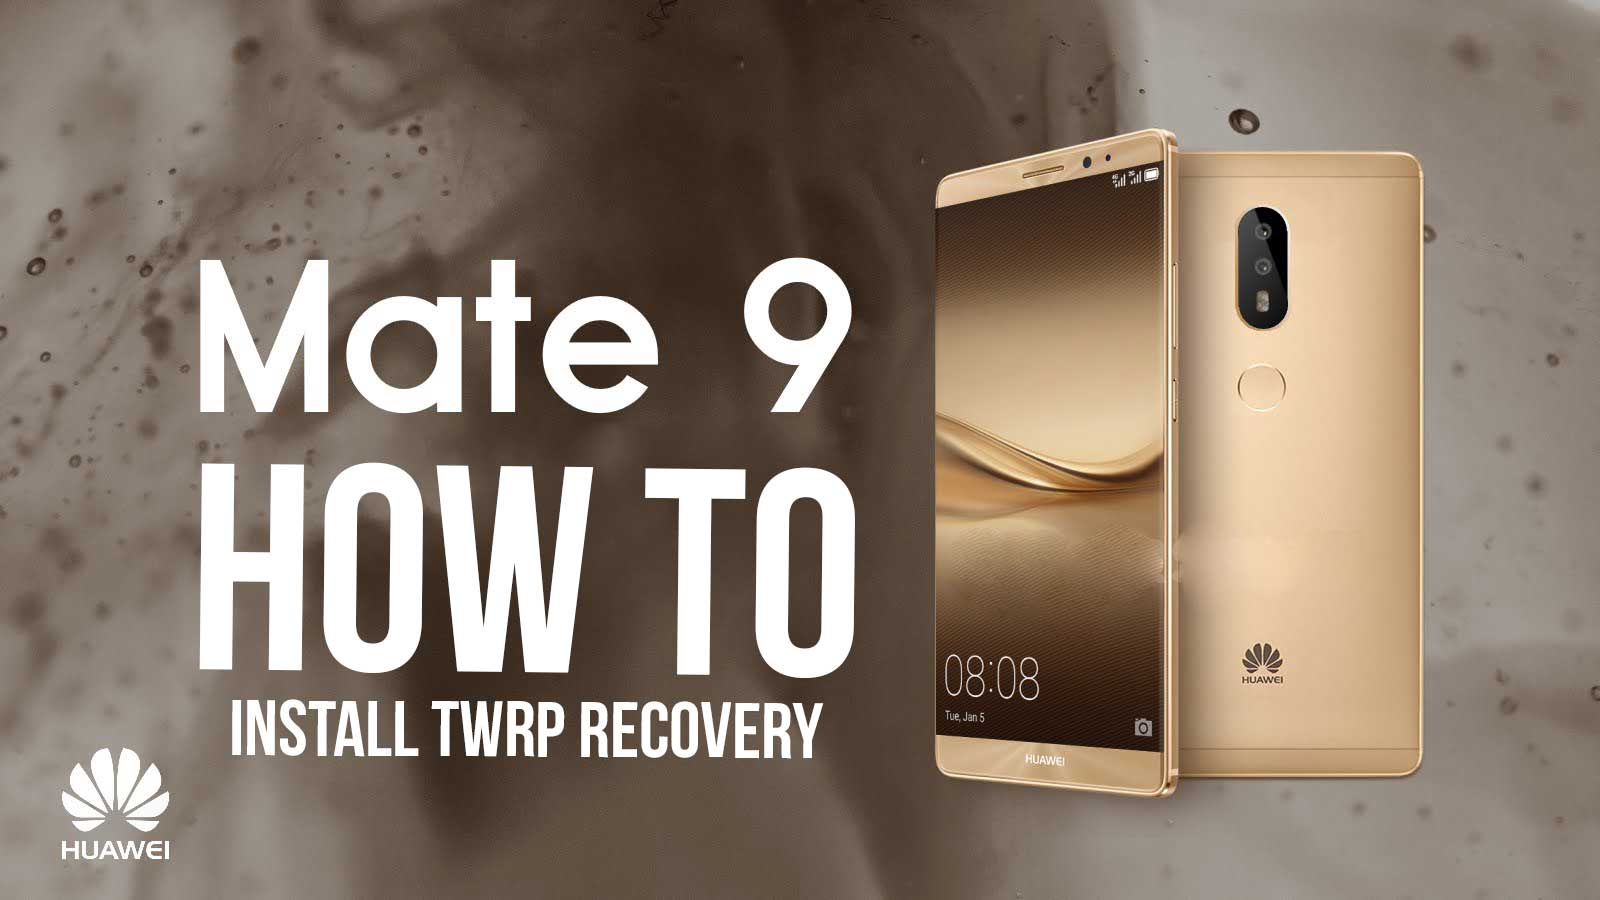 How To Root And Install TWRP Recovery On Huawei Mate 9